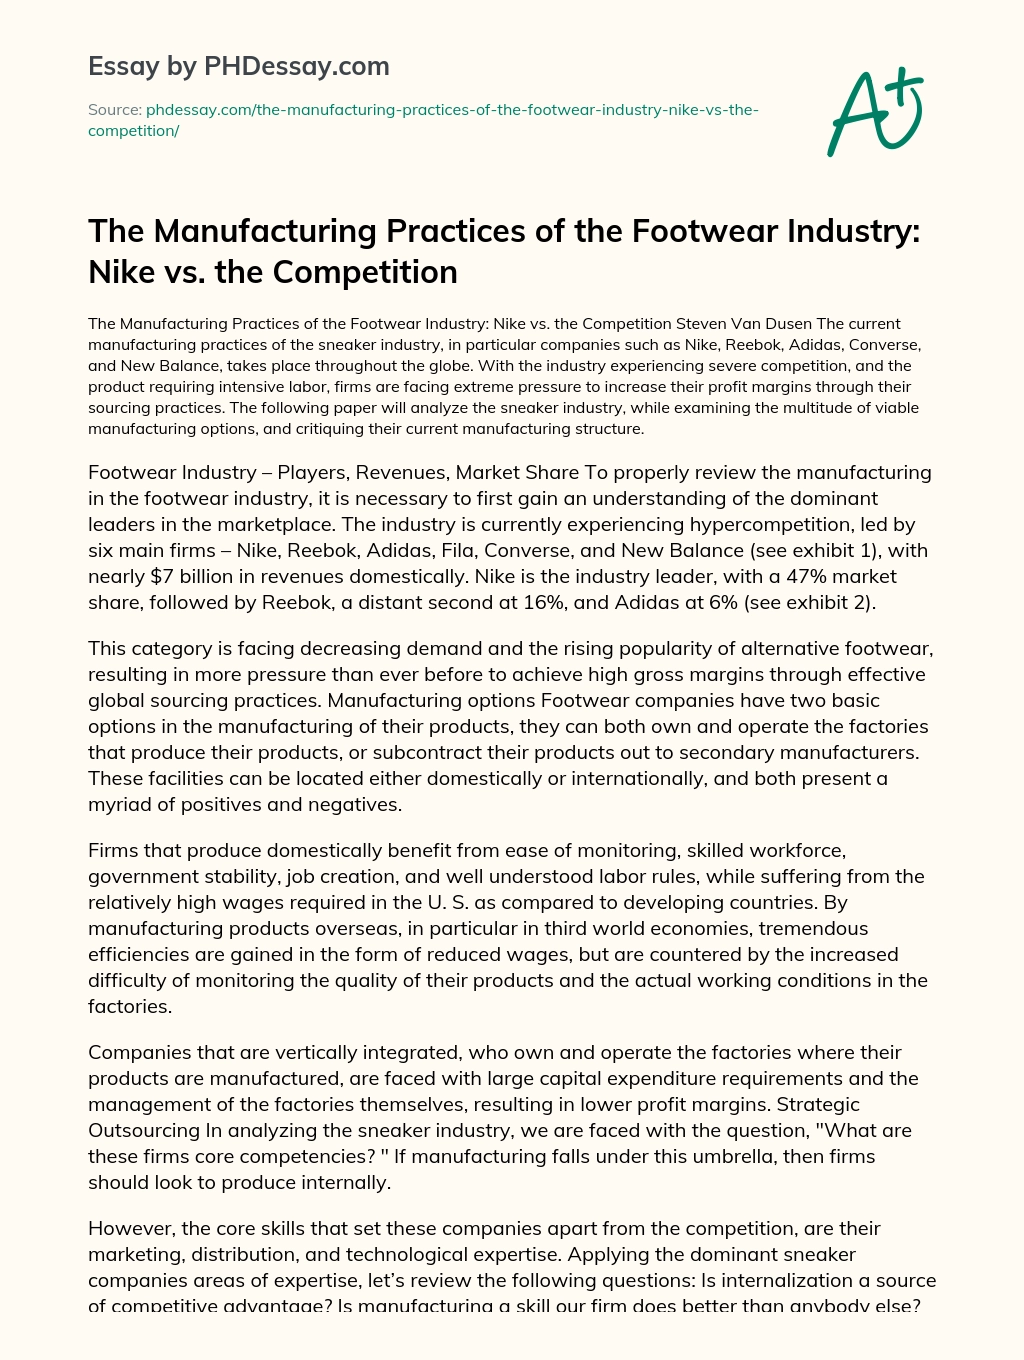 The Manufacturing Practices of the Footwear Industry: Nike vs. the Competition essay